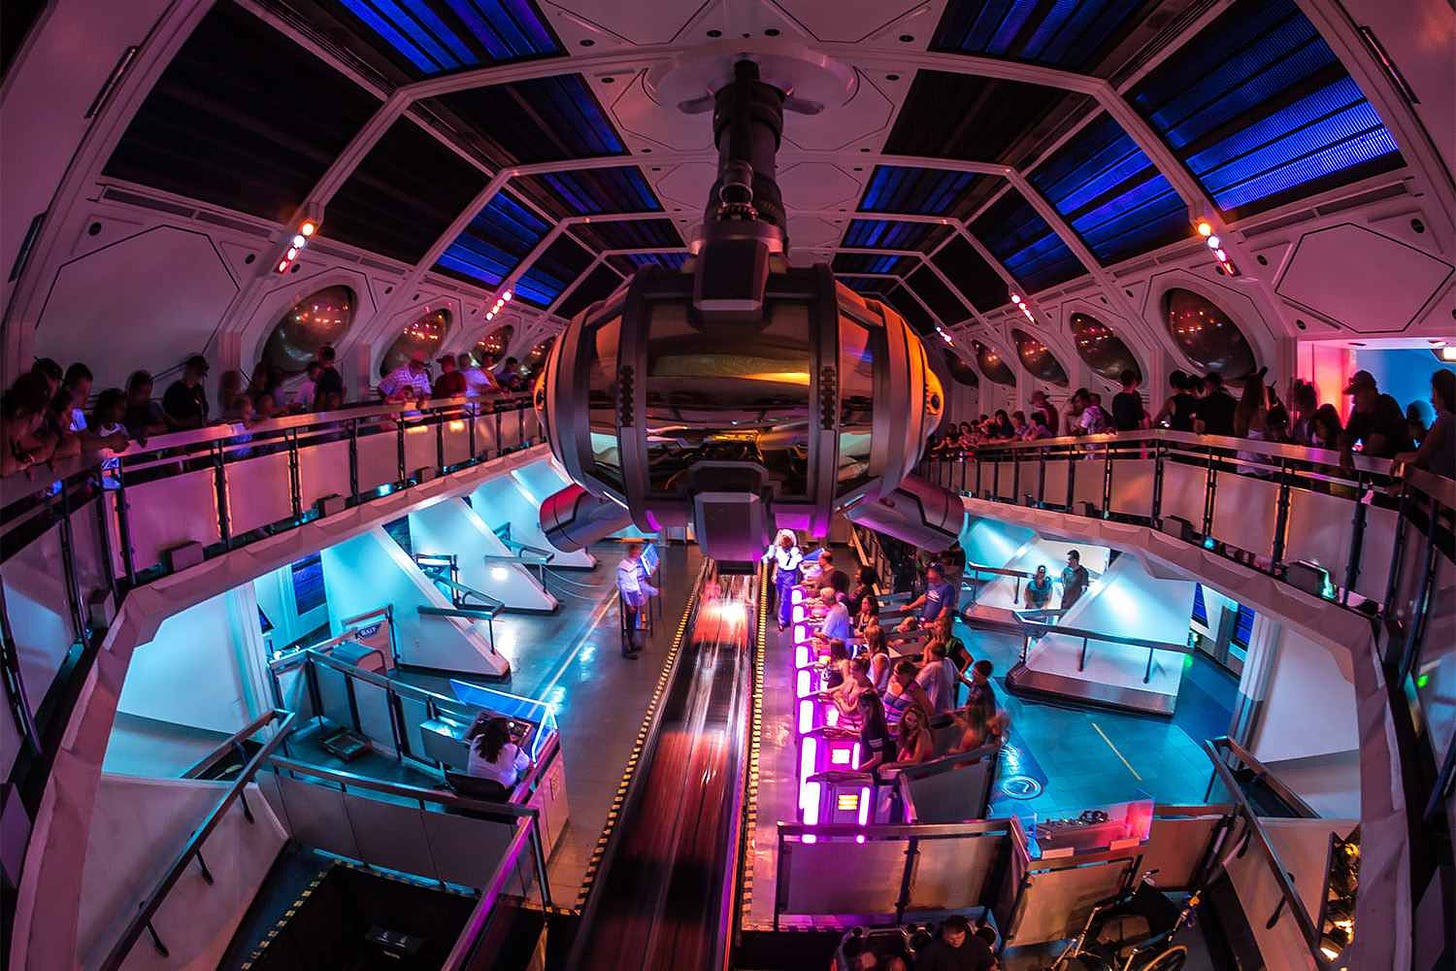 Space Mountain at Disneyland: Things You Need to Know